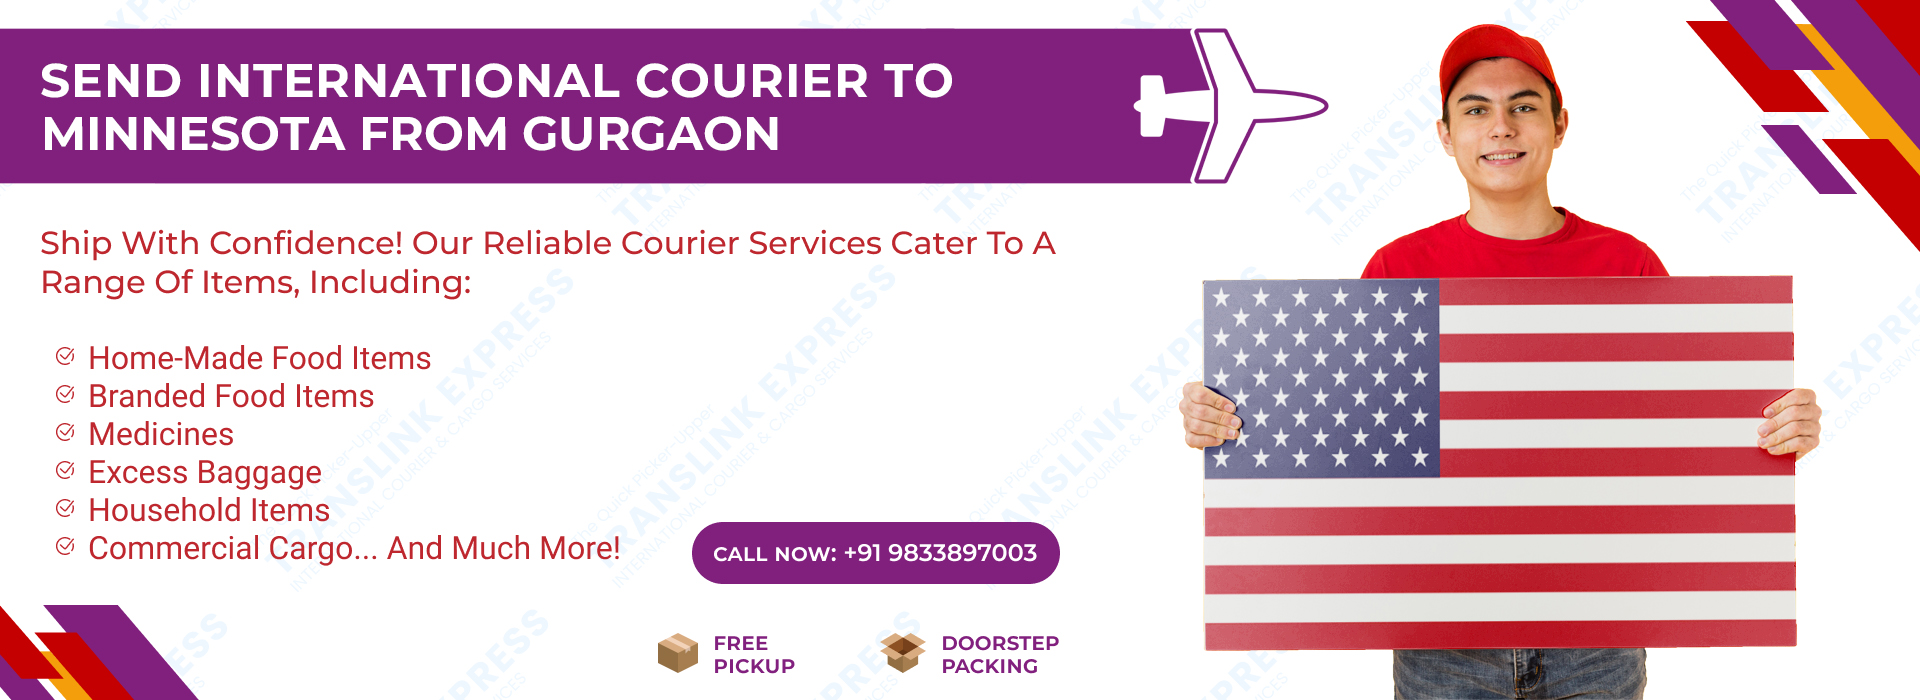 Courier to Minnesota From Gurgaon